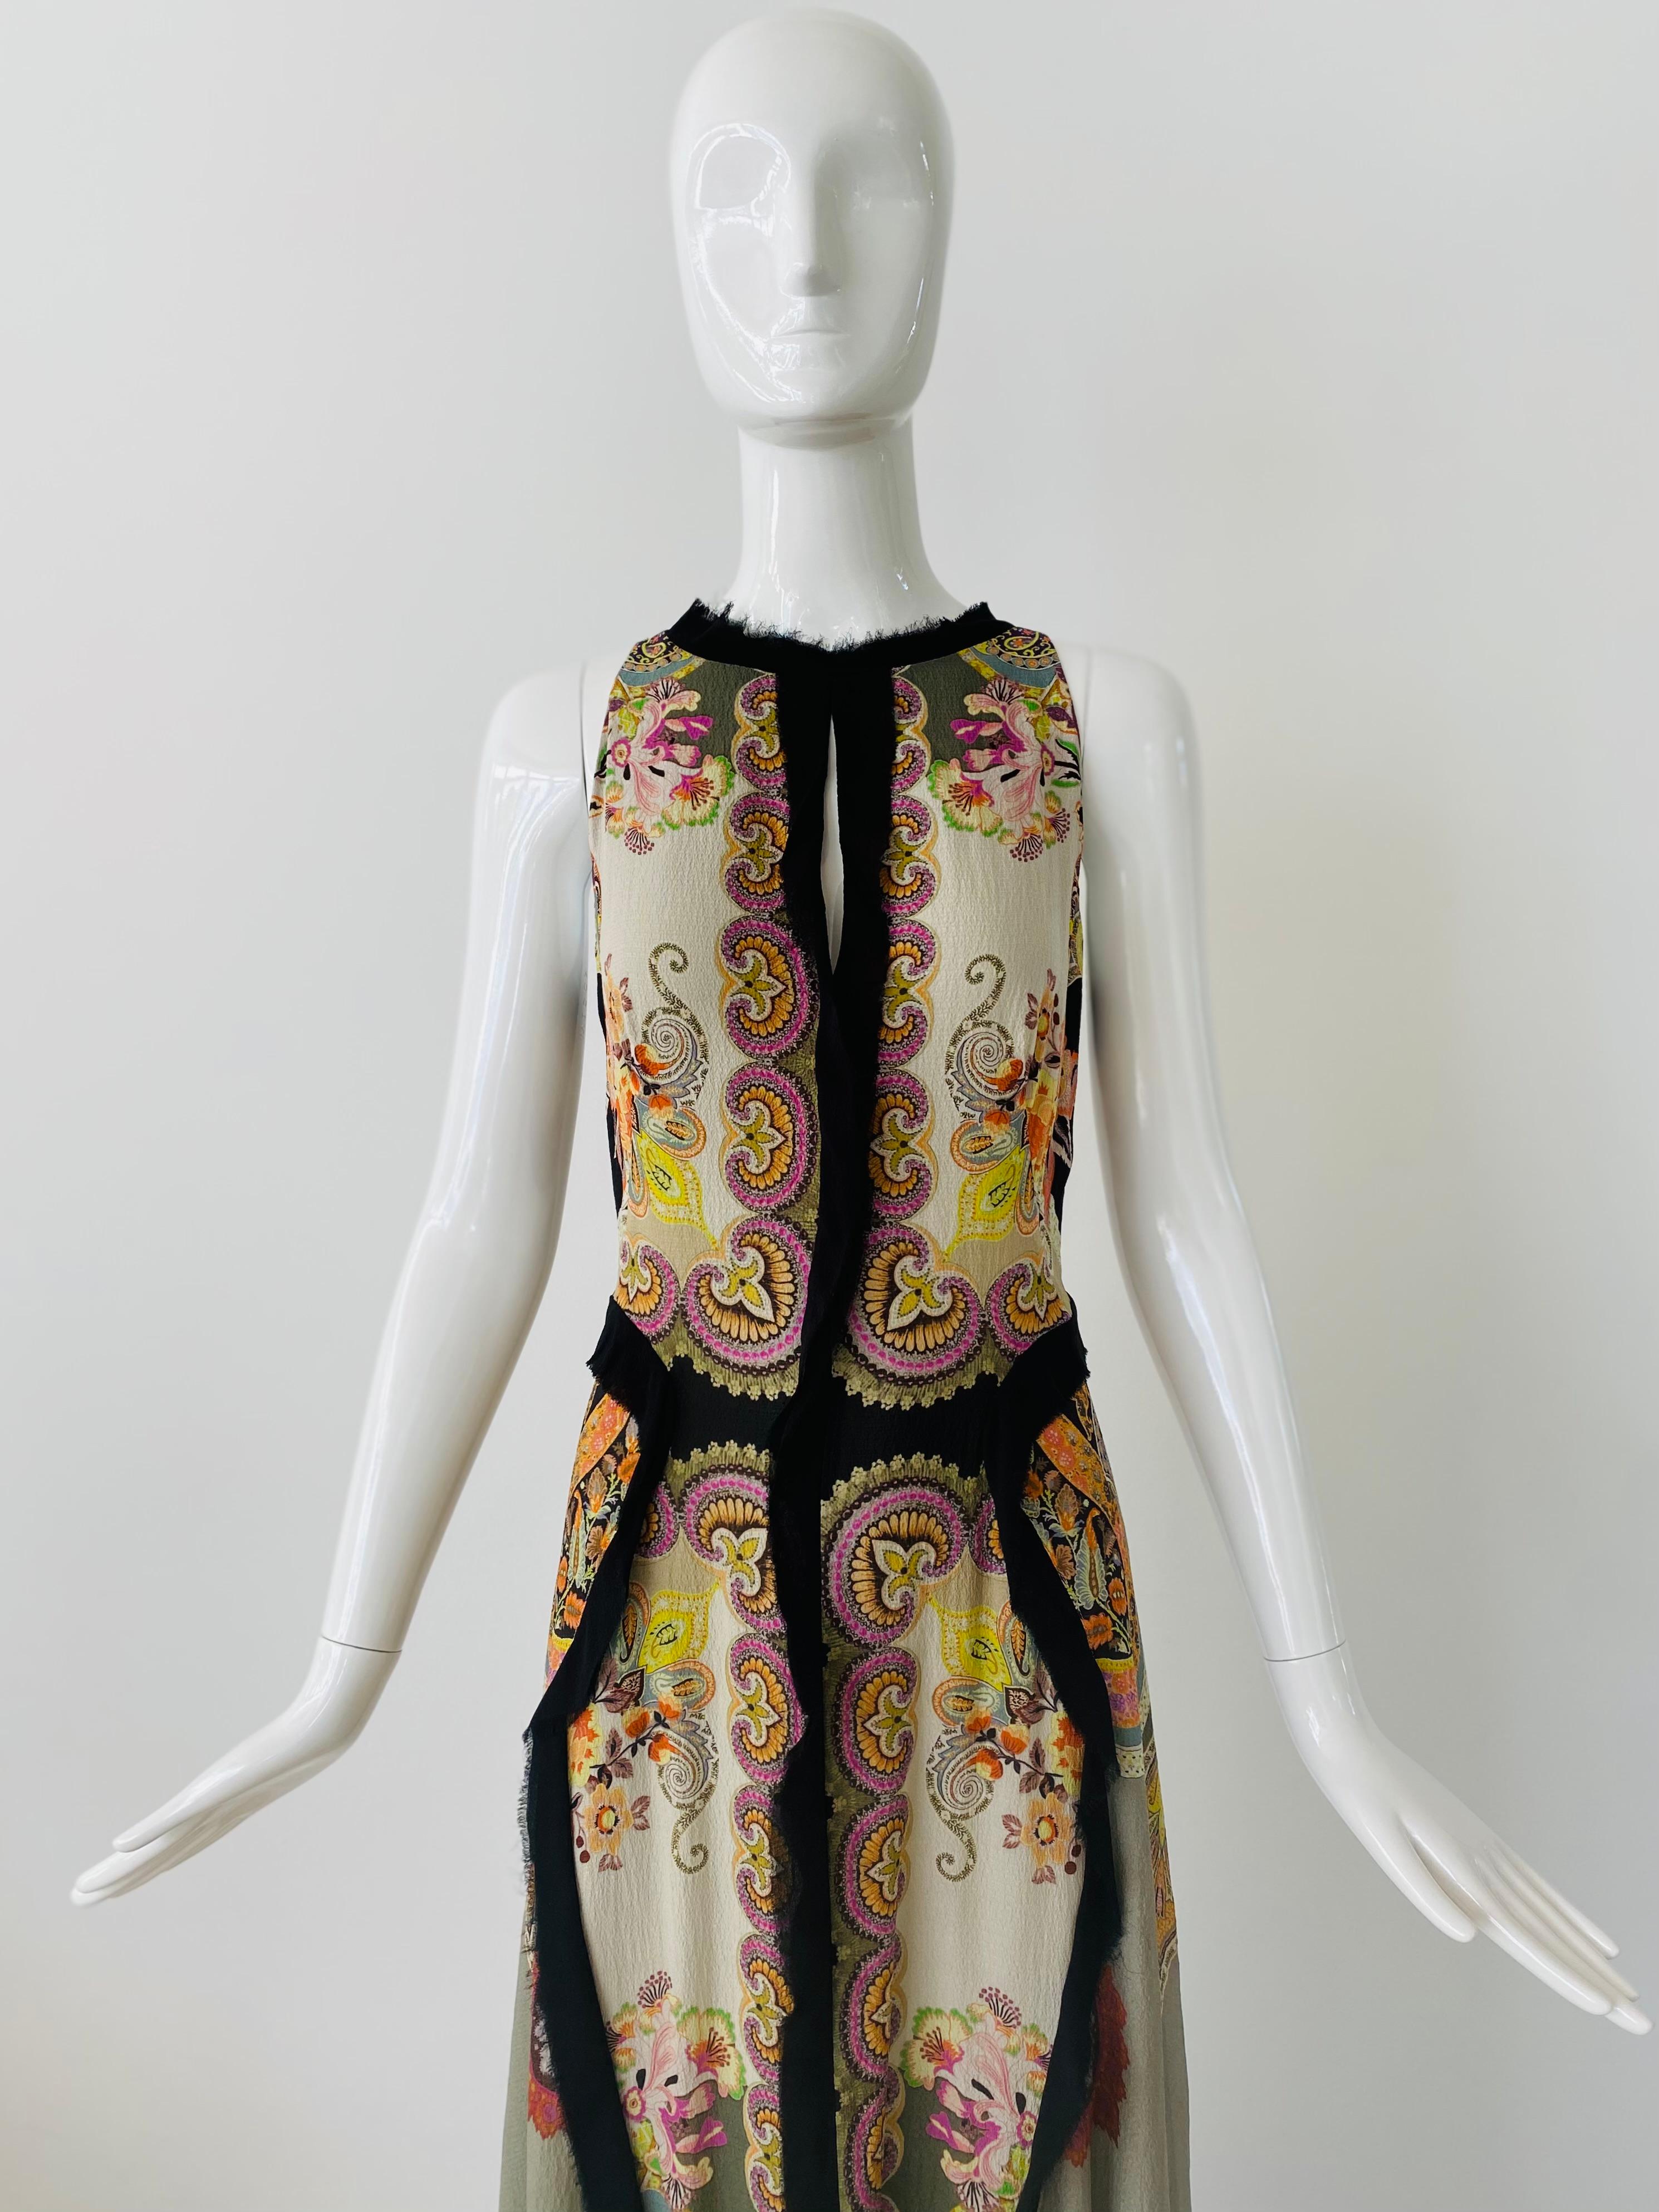 Modern Etro maxi dress in a classic Etro paisley print on soft sheer silk with multiple layers.  Raw hems of black silk that are sewn to face outwards.  There is a cut out slit in the middle of the chest and a deep v down the back.  The lightness of